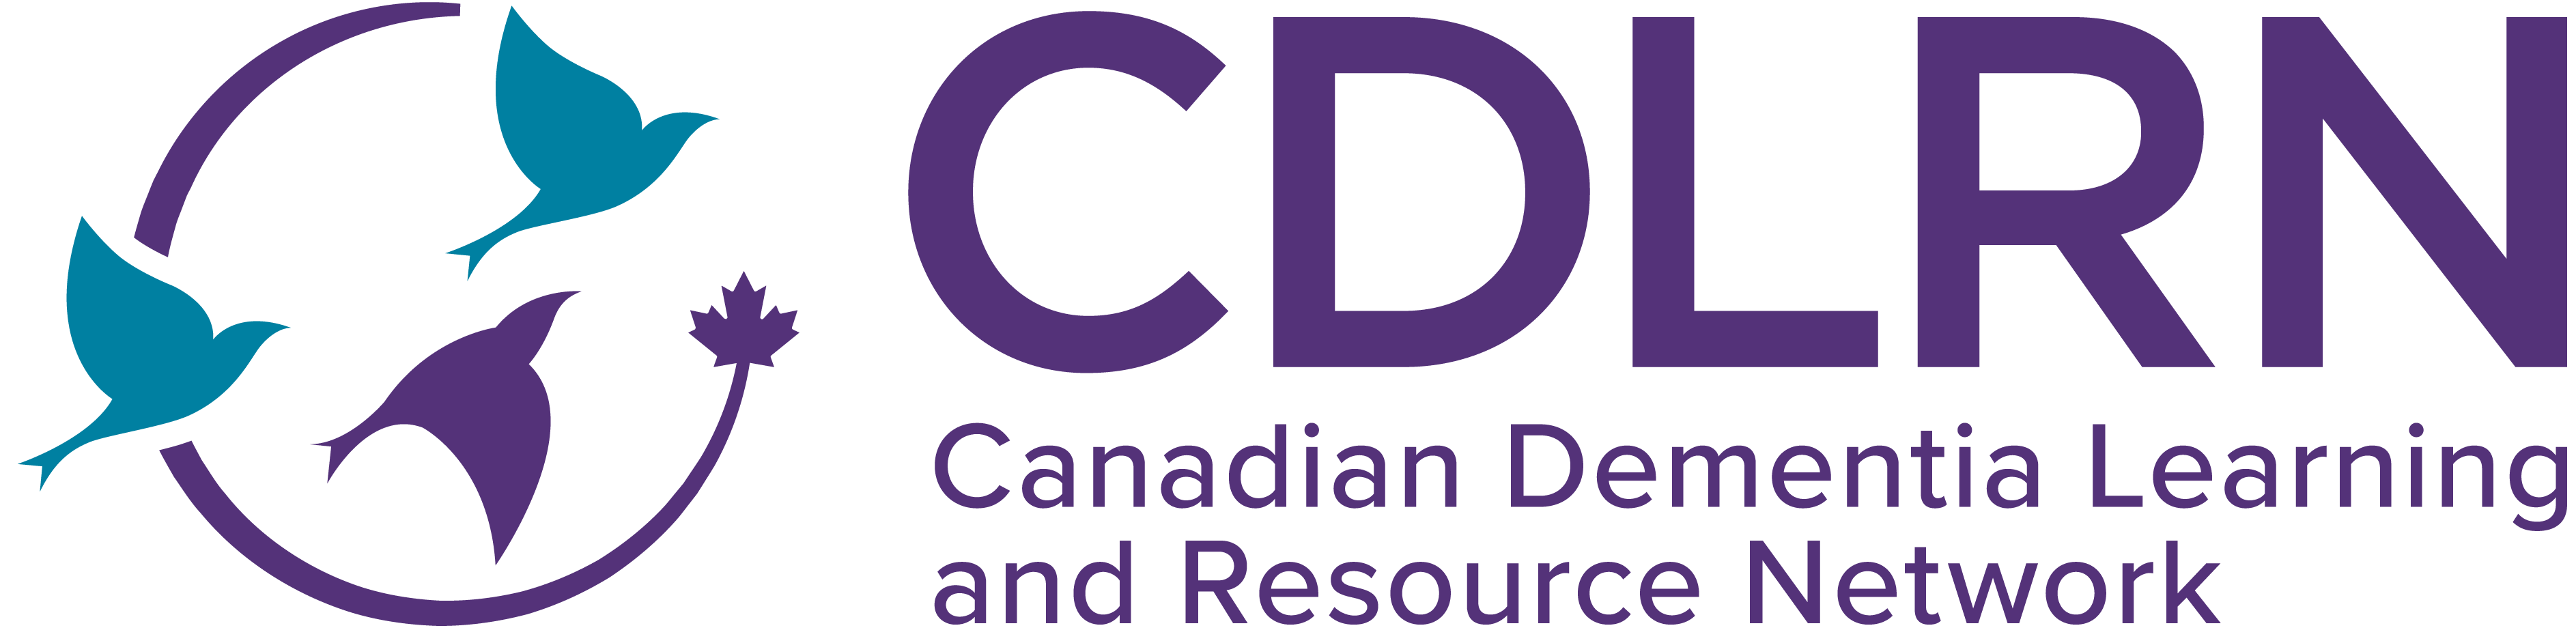 Learn More About the Canadian Dementia Learning and Resource Network – CDLRN